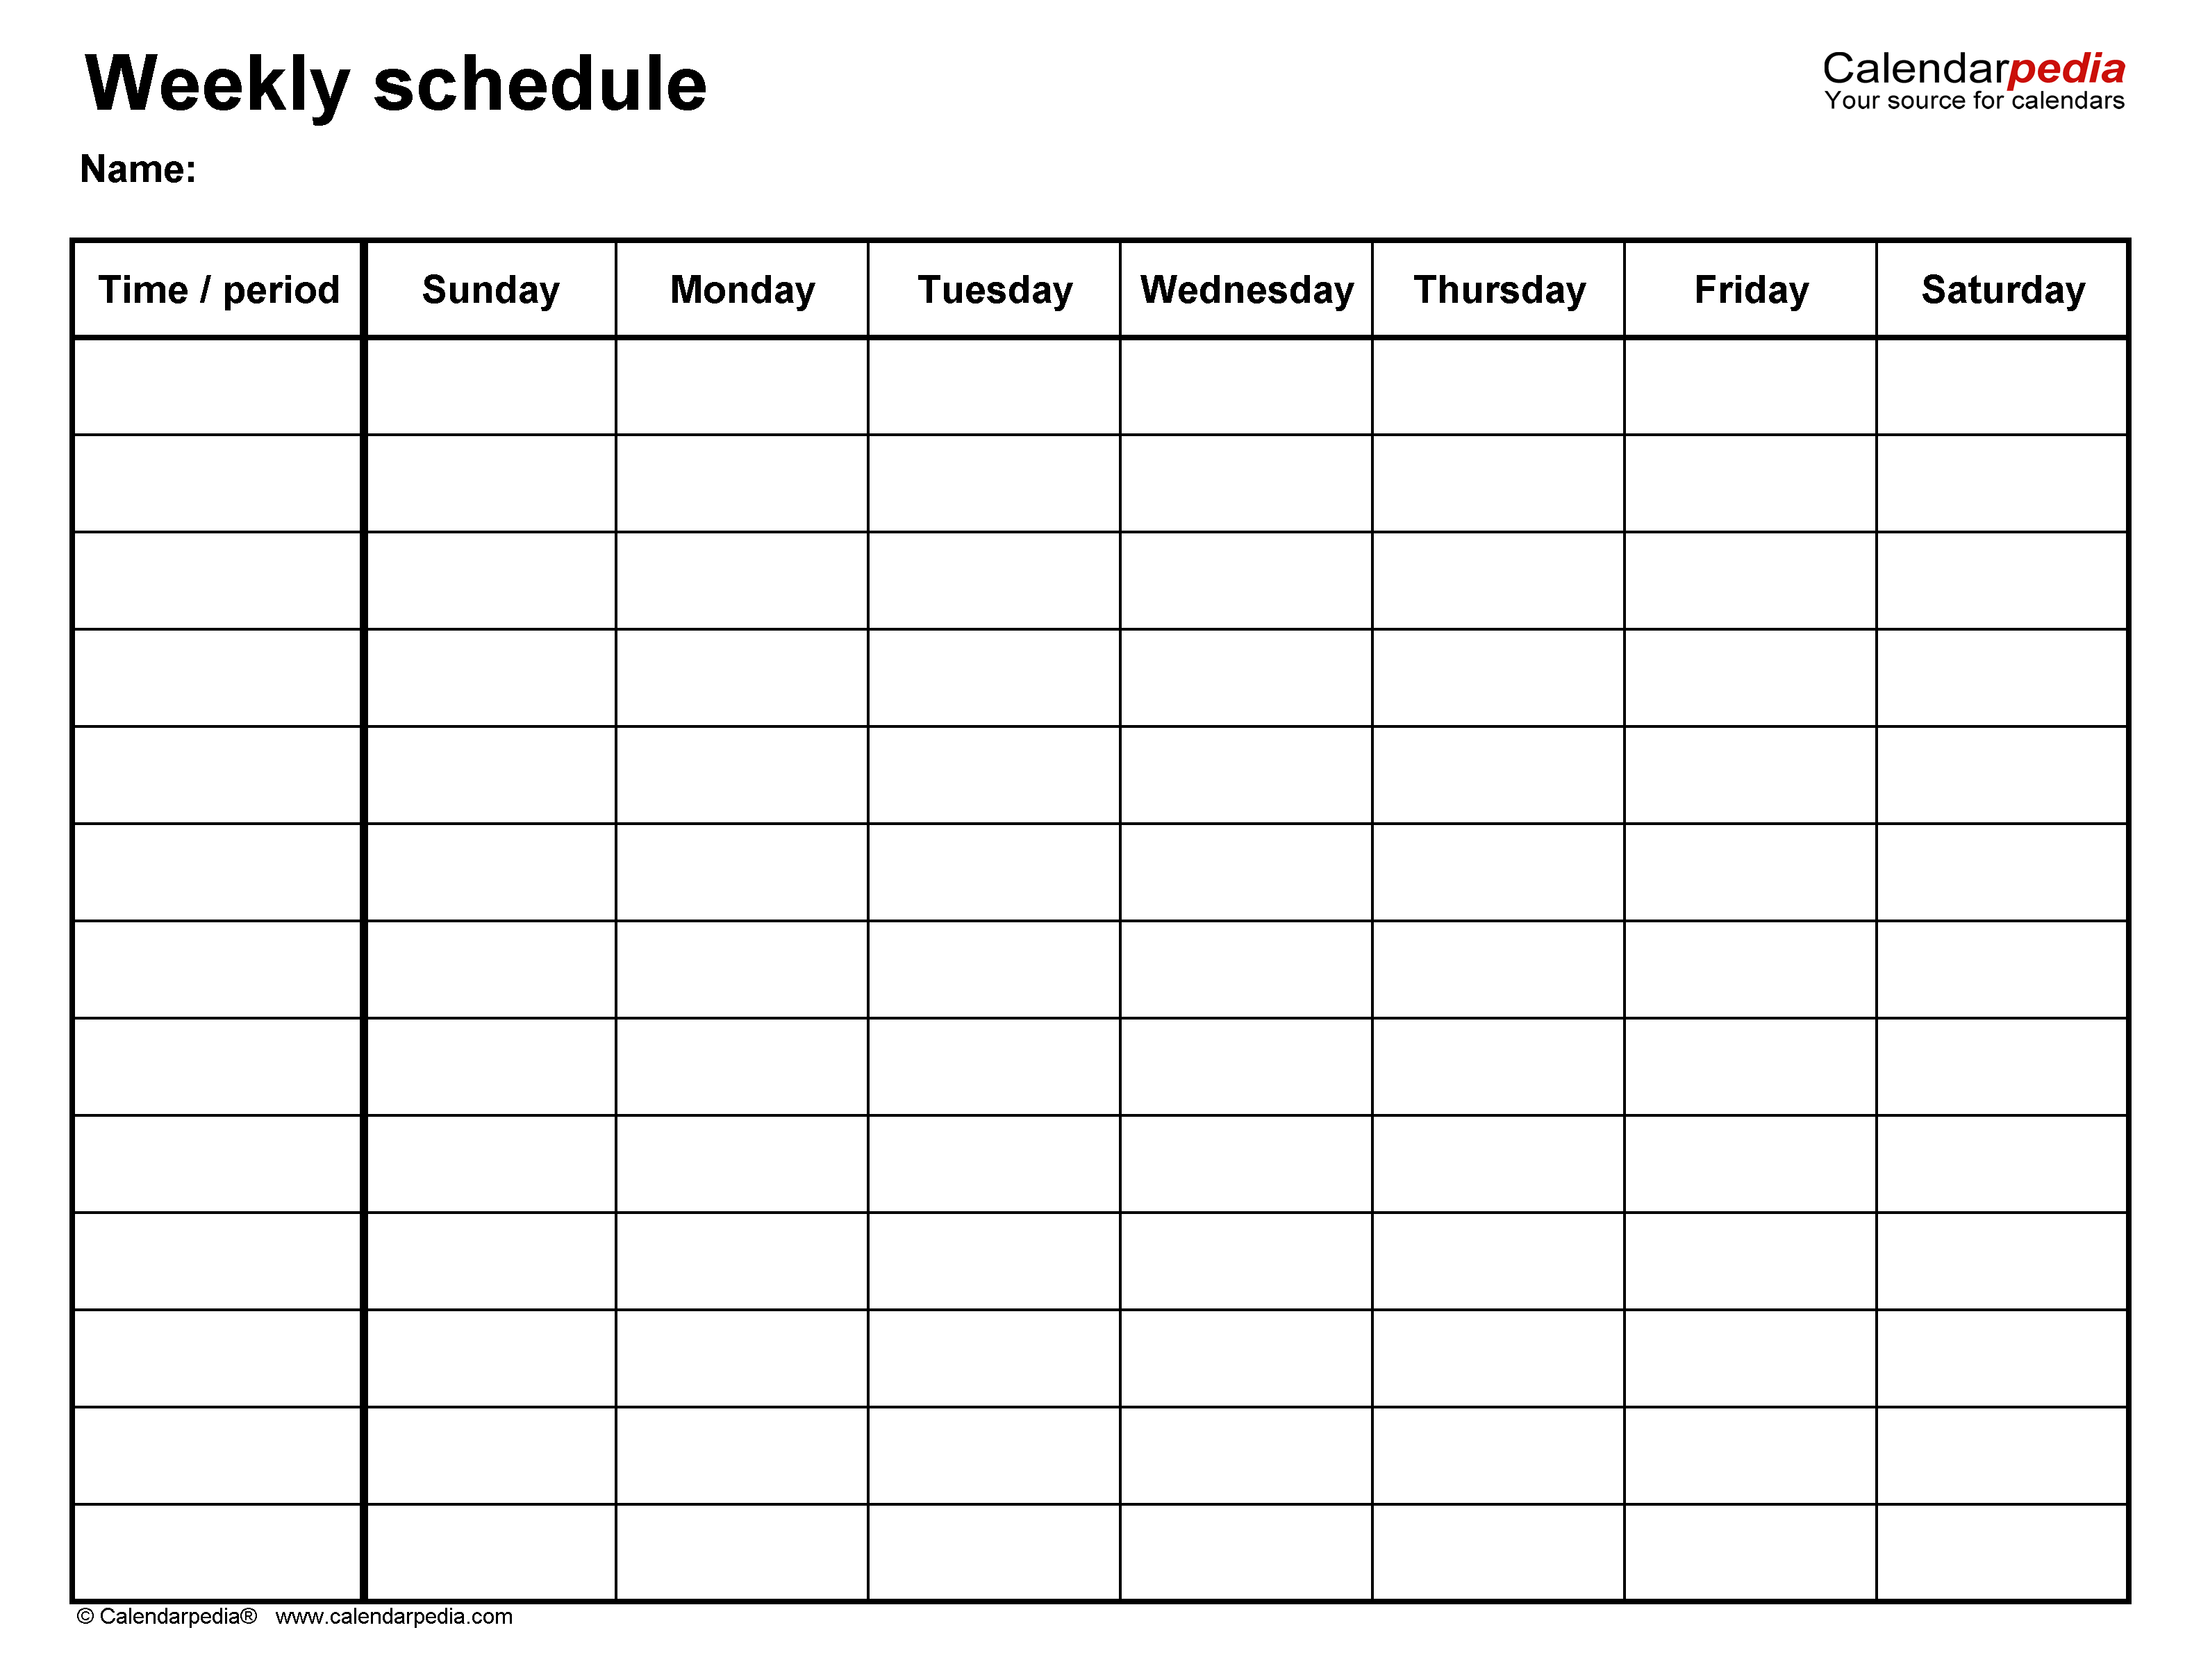 Free Weekly Schedules For Word 18 Templates